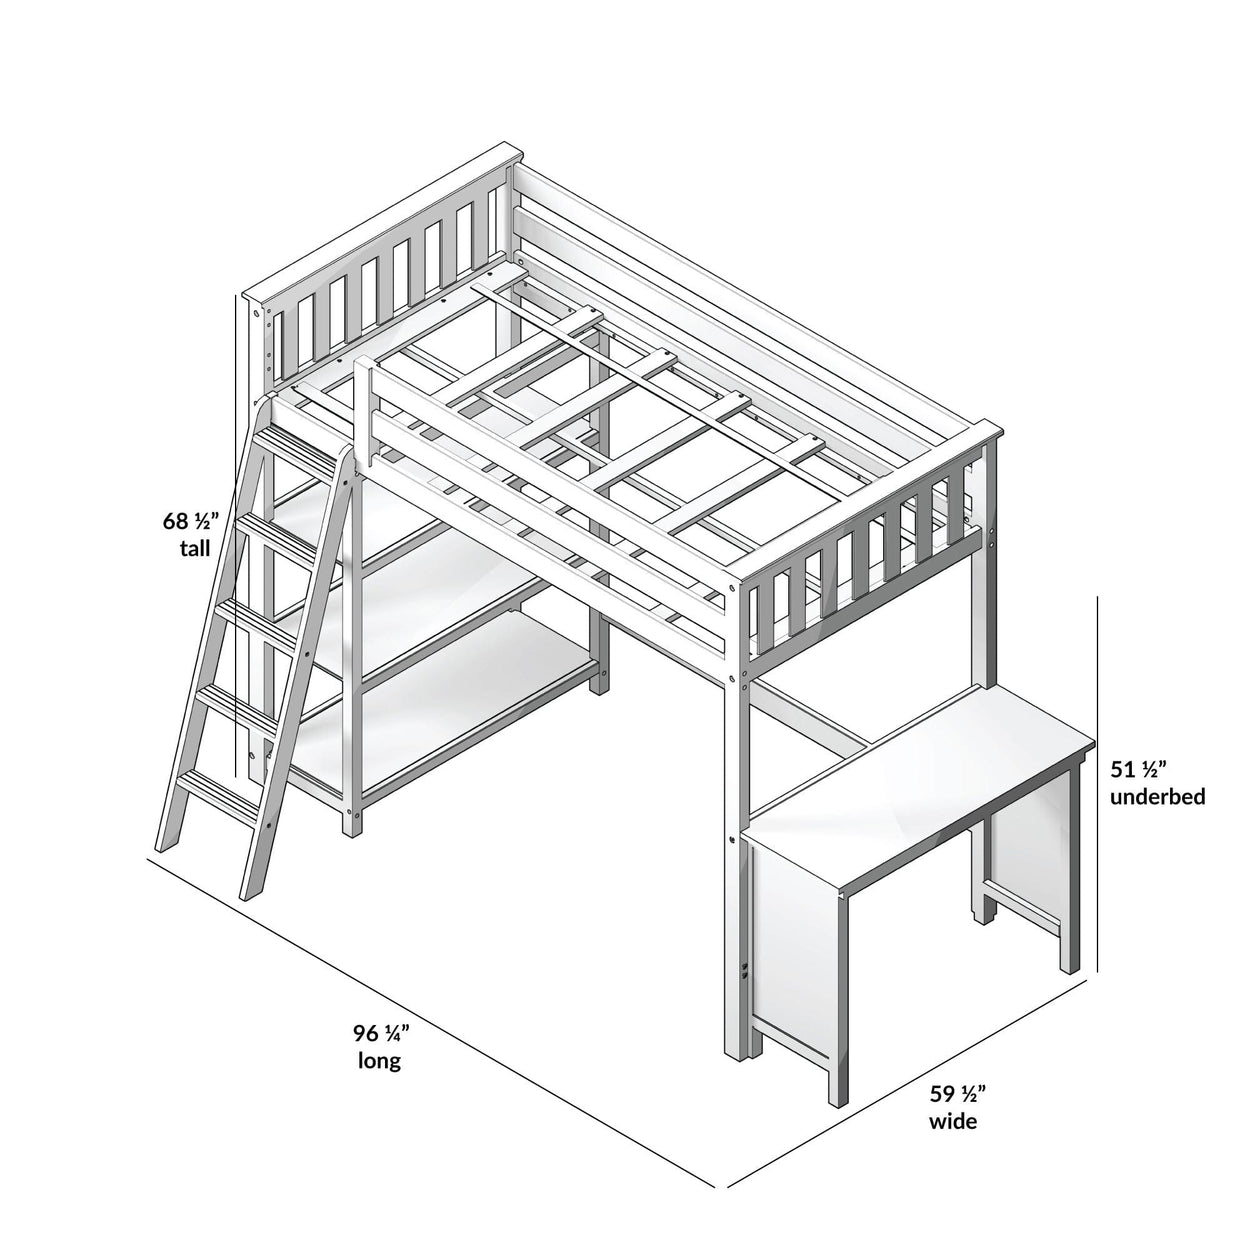 185218-151 : Loft Beds Twin-Size High Loft Bed with Bookcase and Desk, Clay